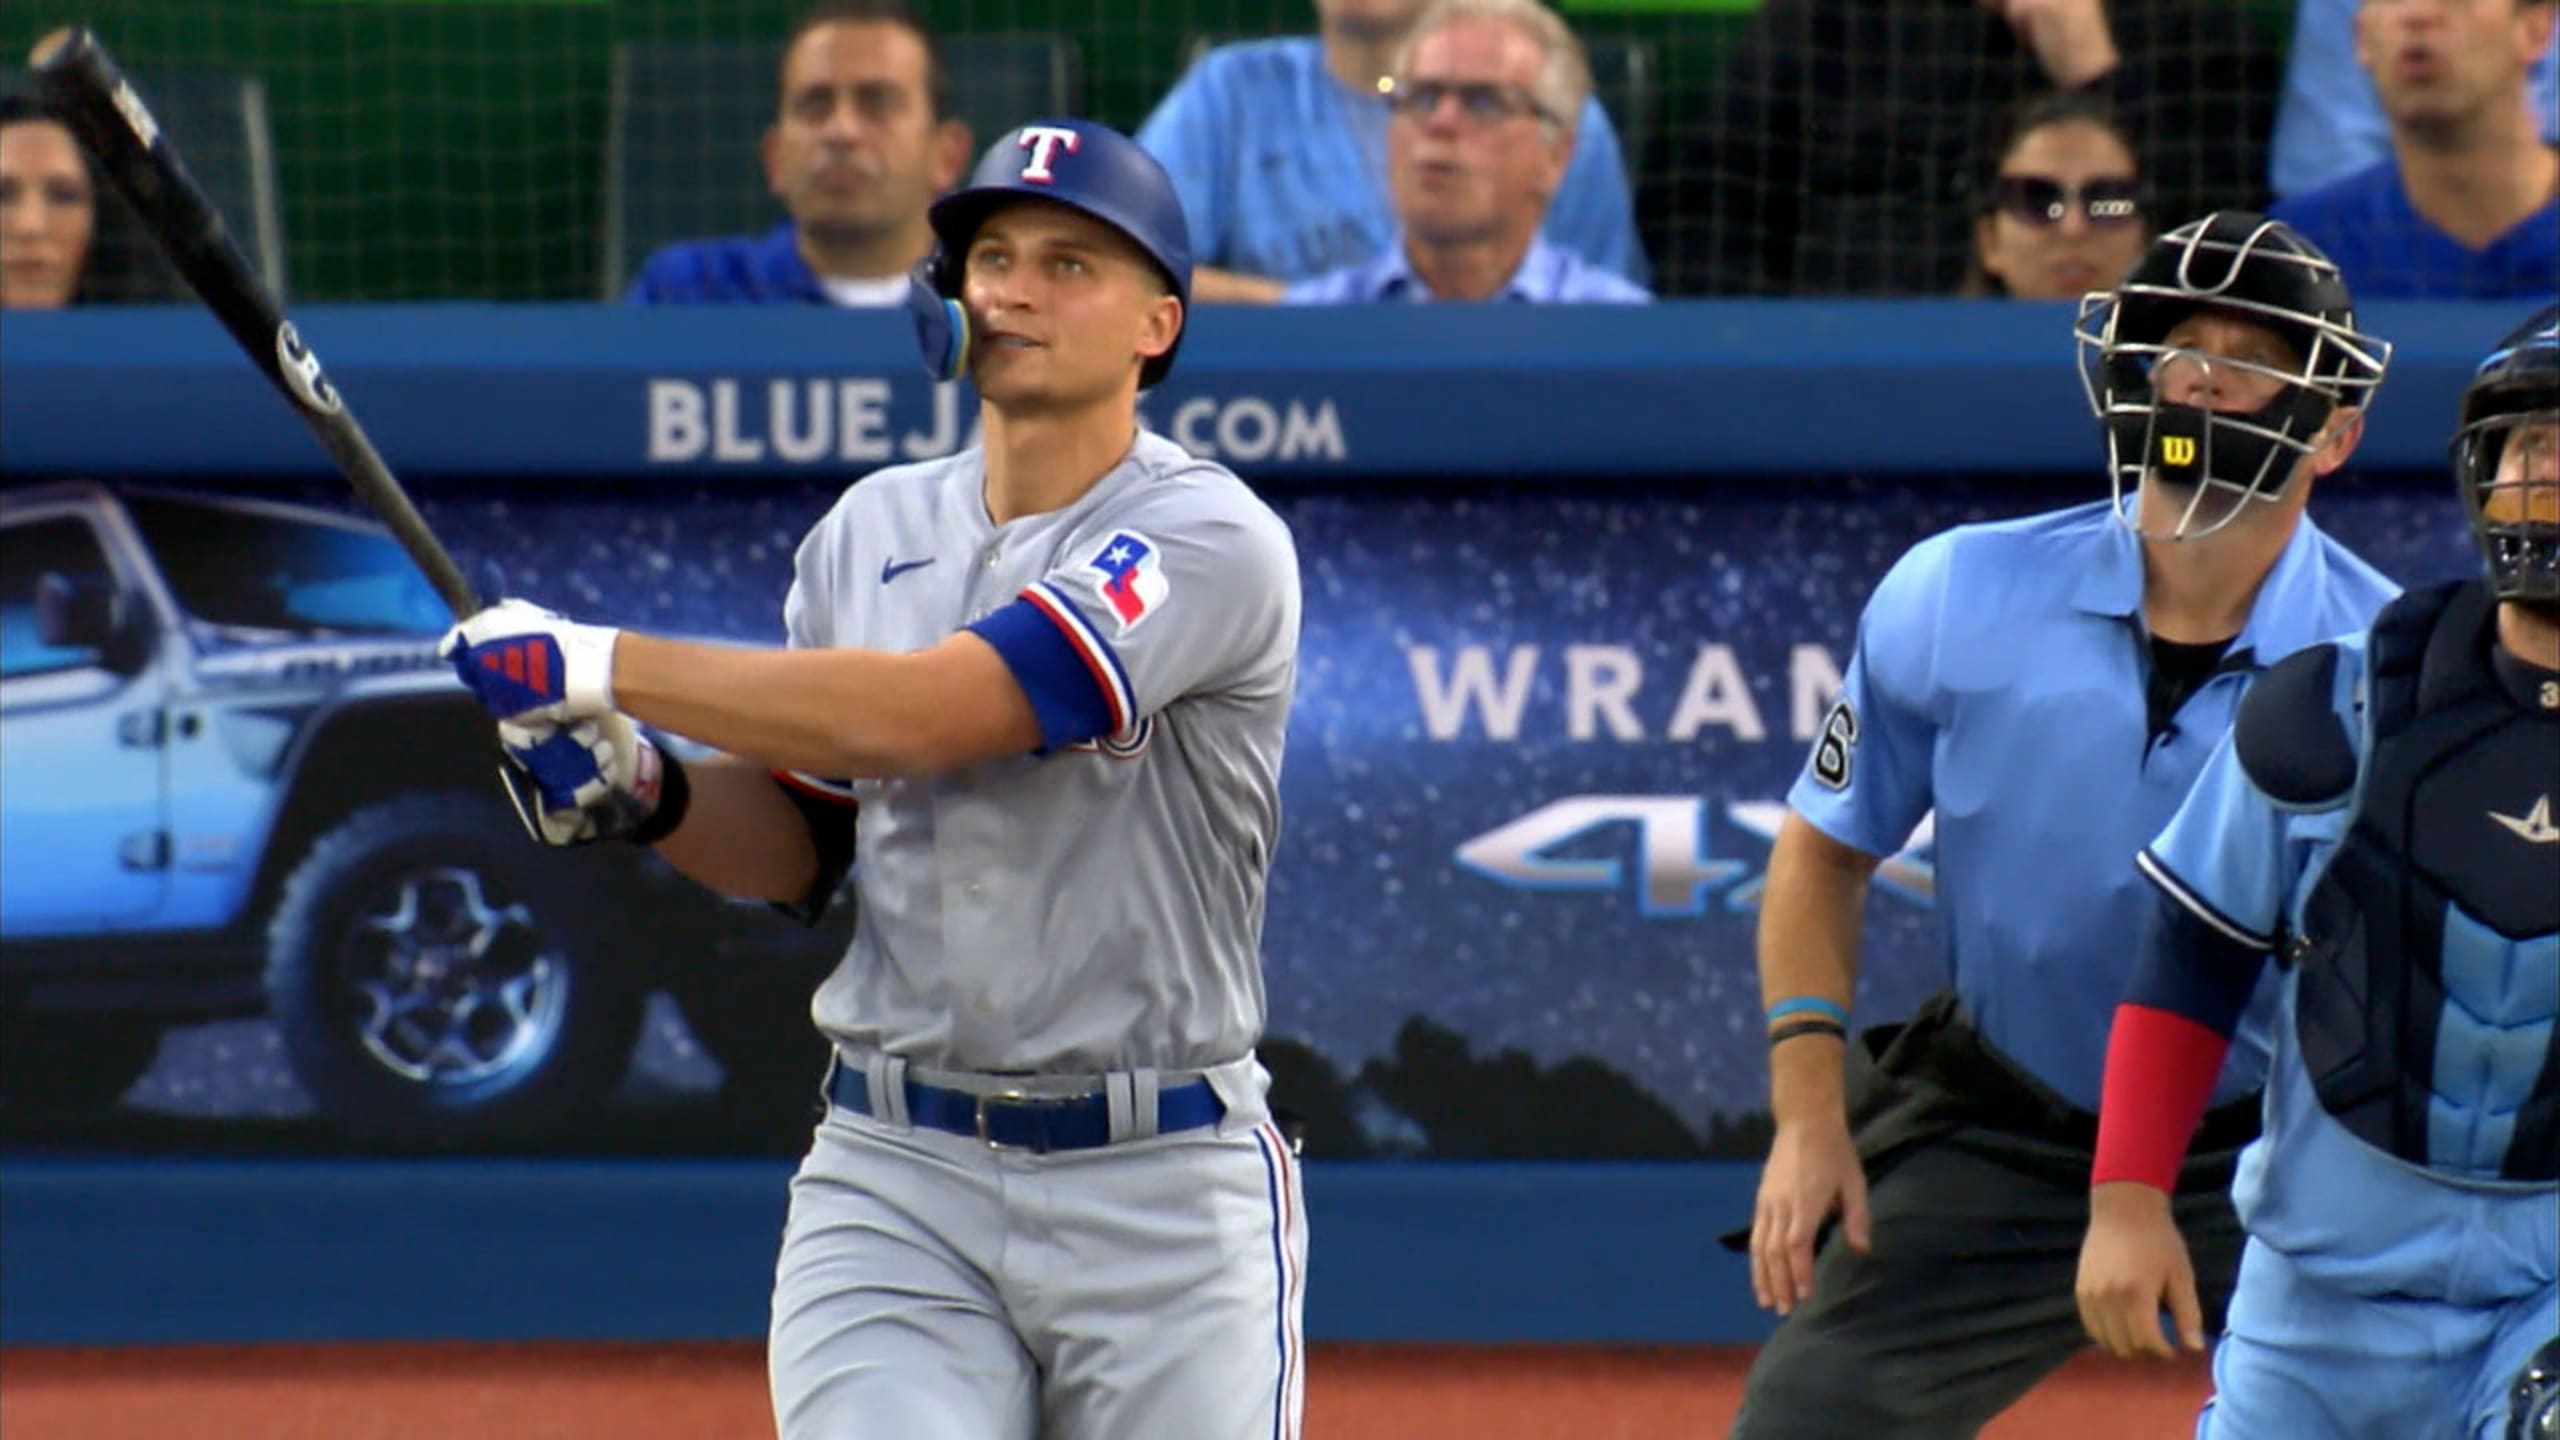 Yankees Rivals: Blue Jays swept by Rangers, changing Wild Card